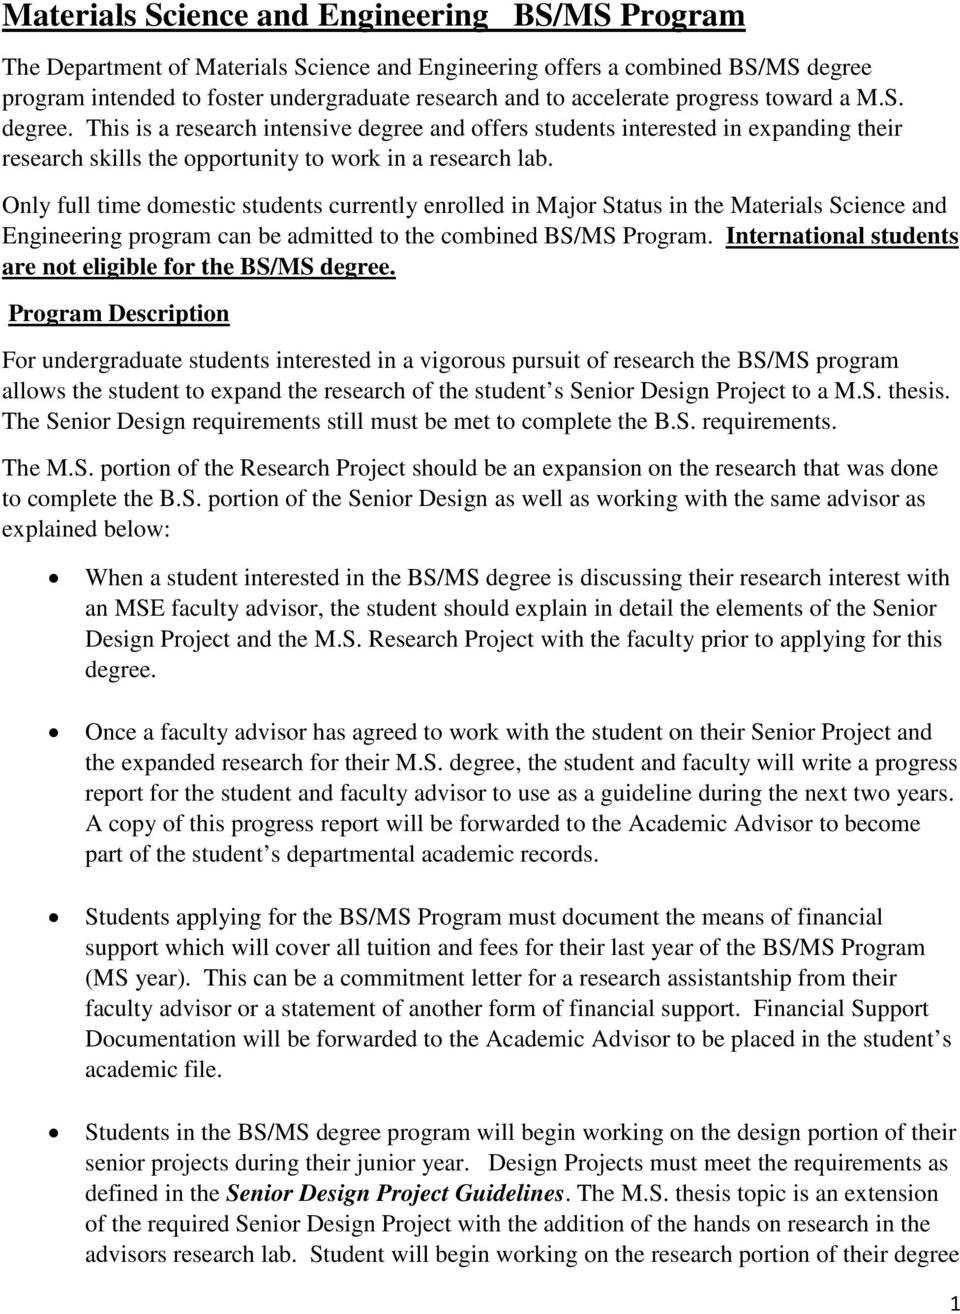 Only full time domestic students currently enrolled in Major Status in the Materials Science and Engineering program can be admitted to the combined BS/MS Program.